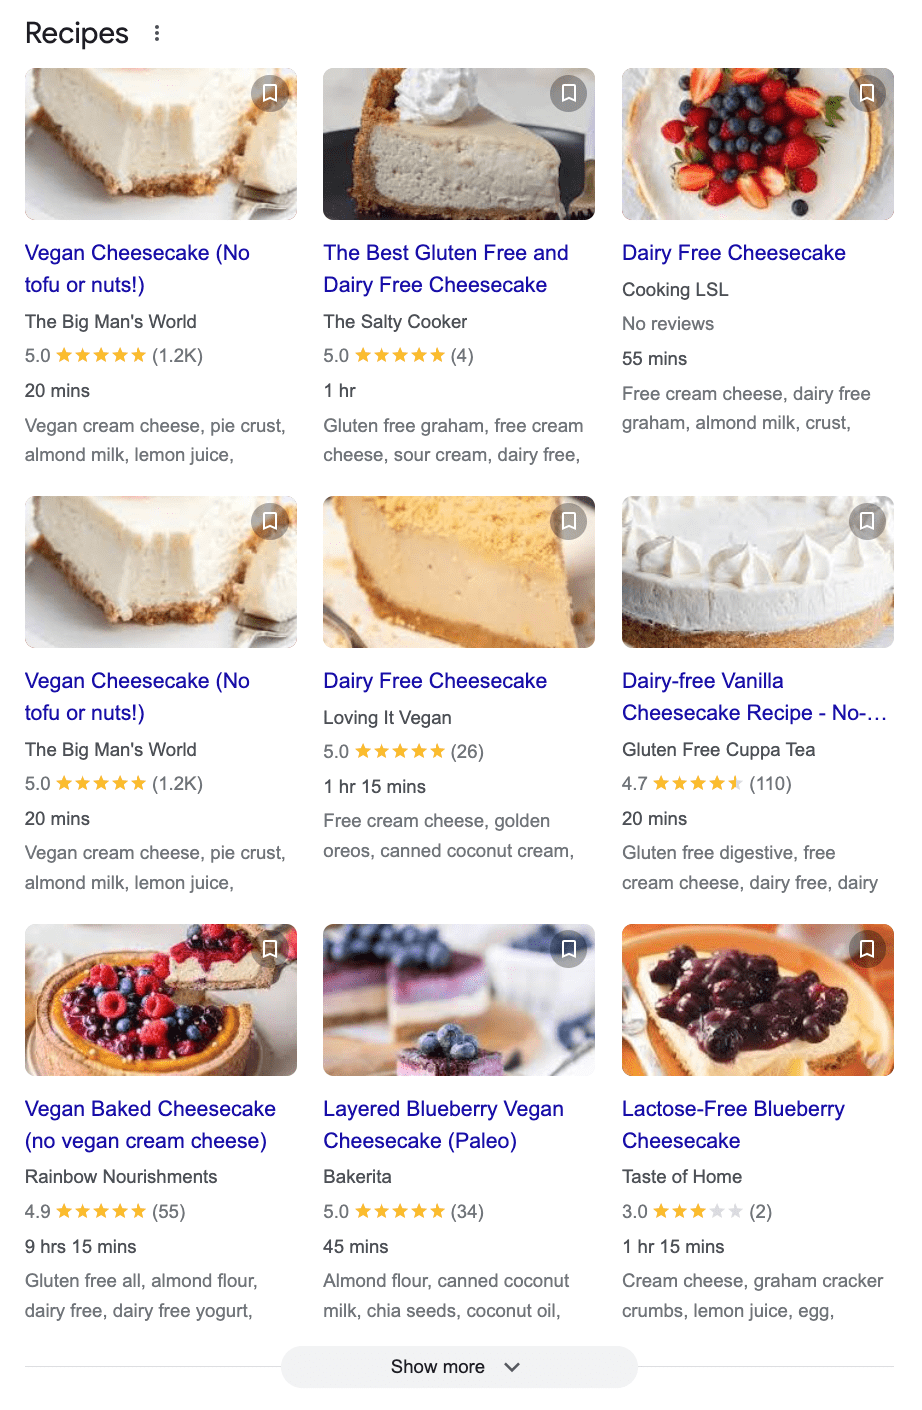 expanded desktop recipe search results